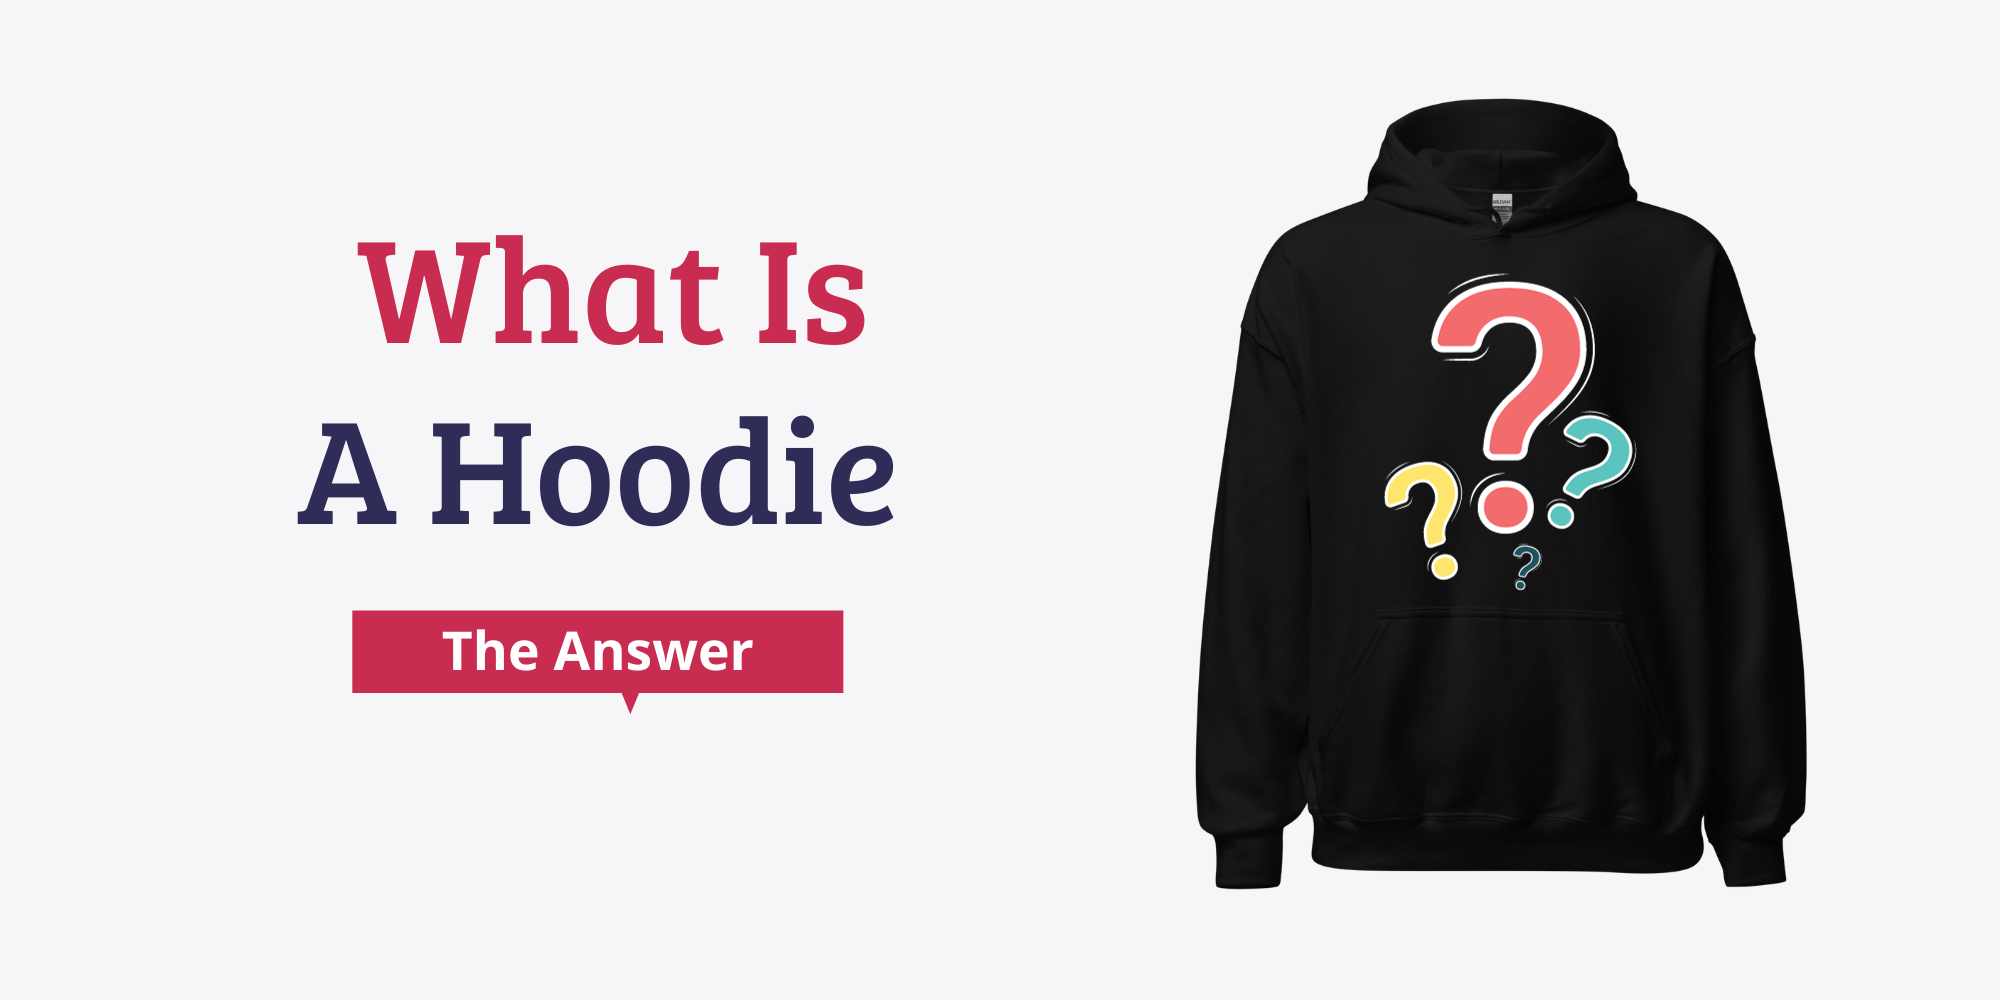 What Is A Hoodie? History and Characteristics